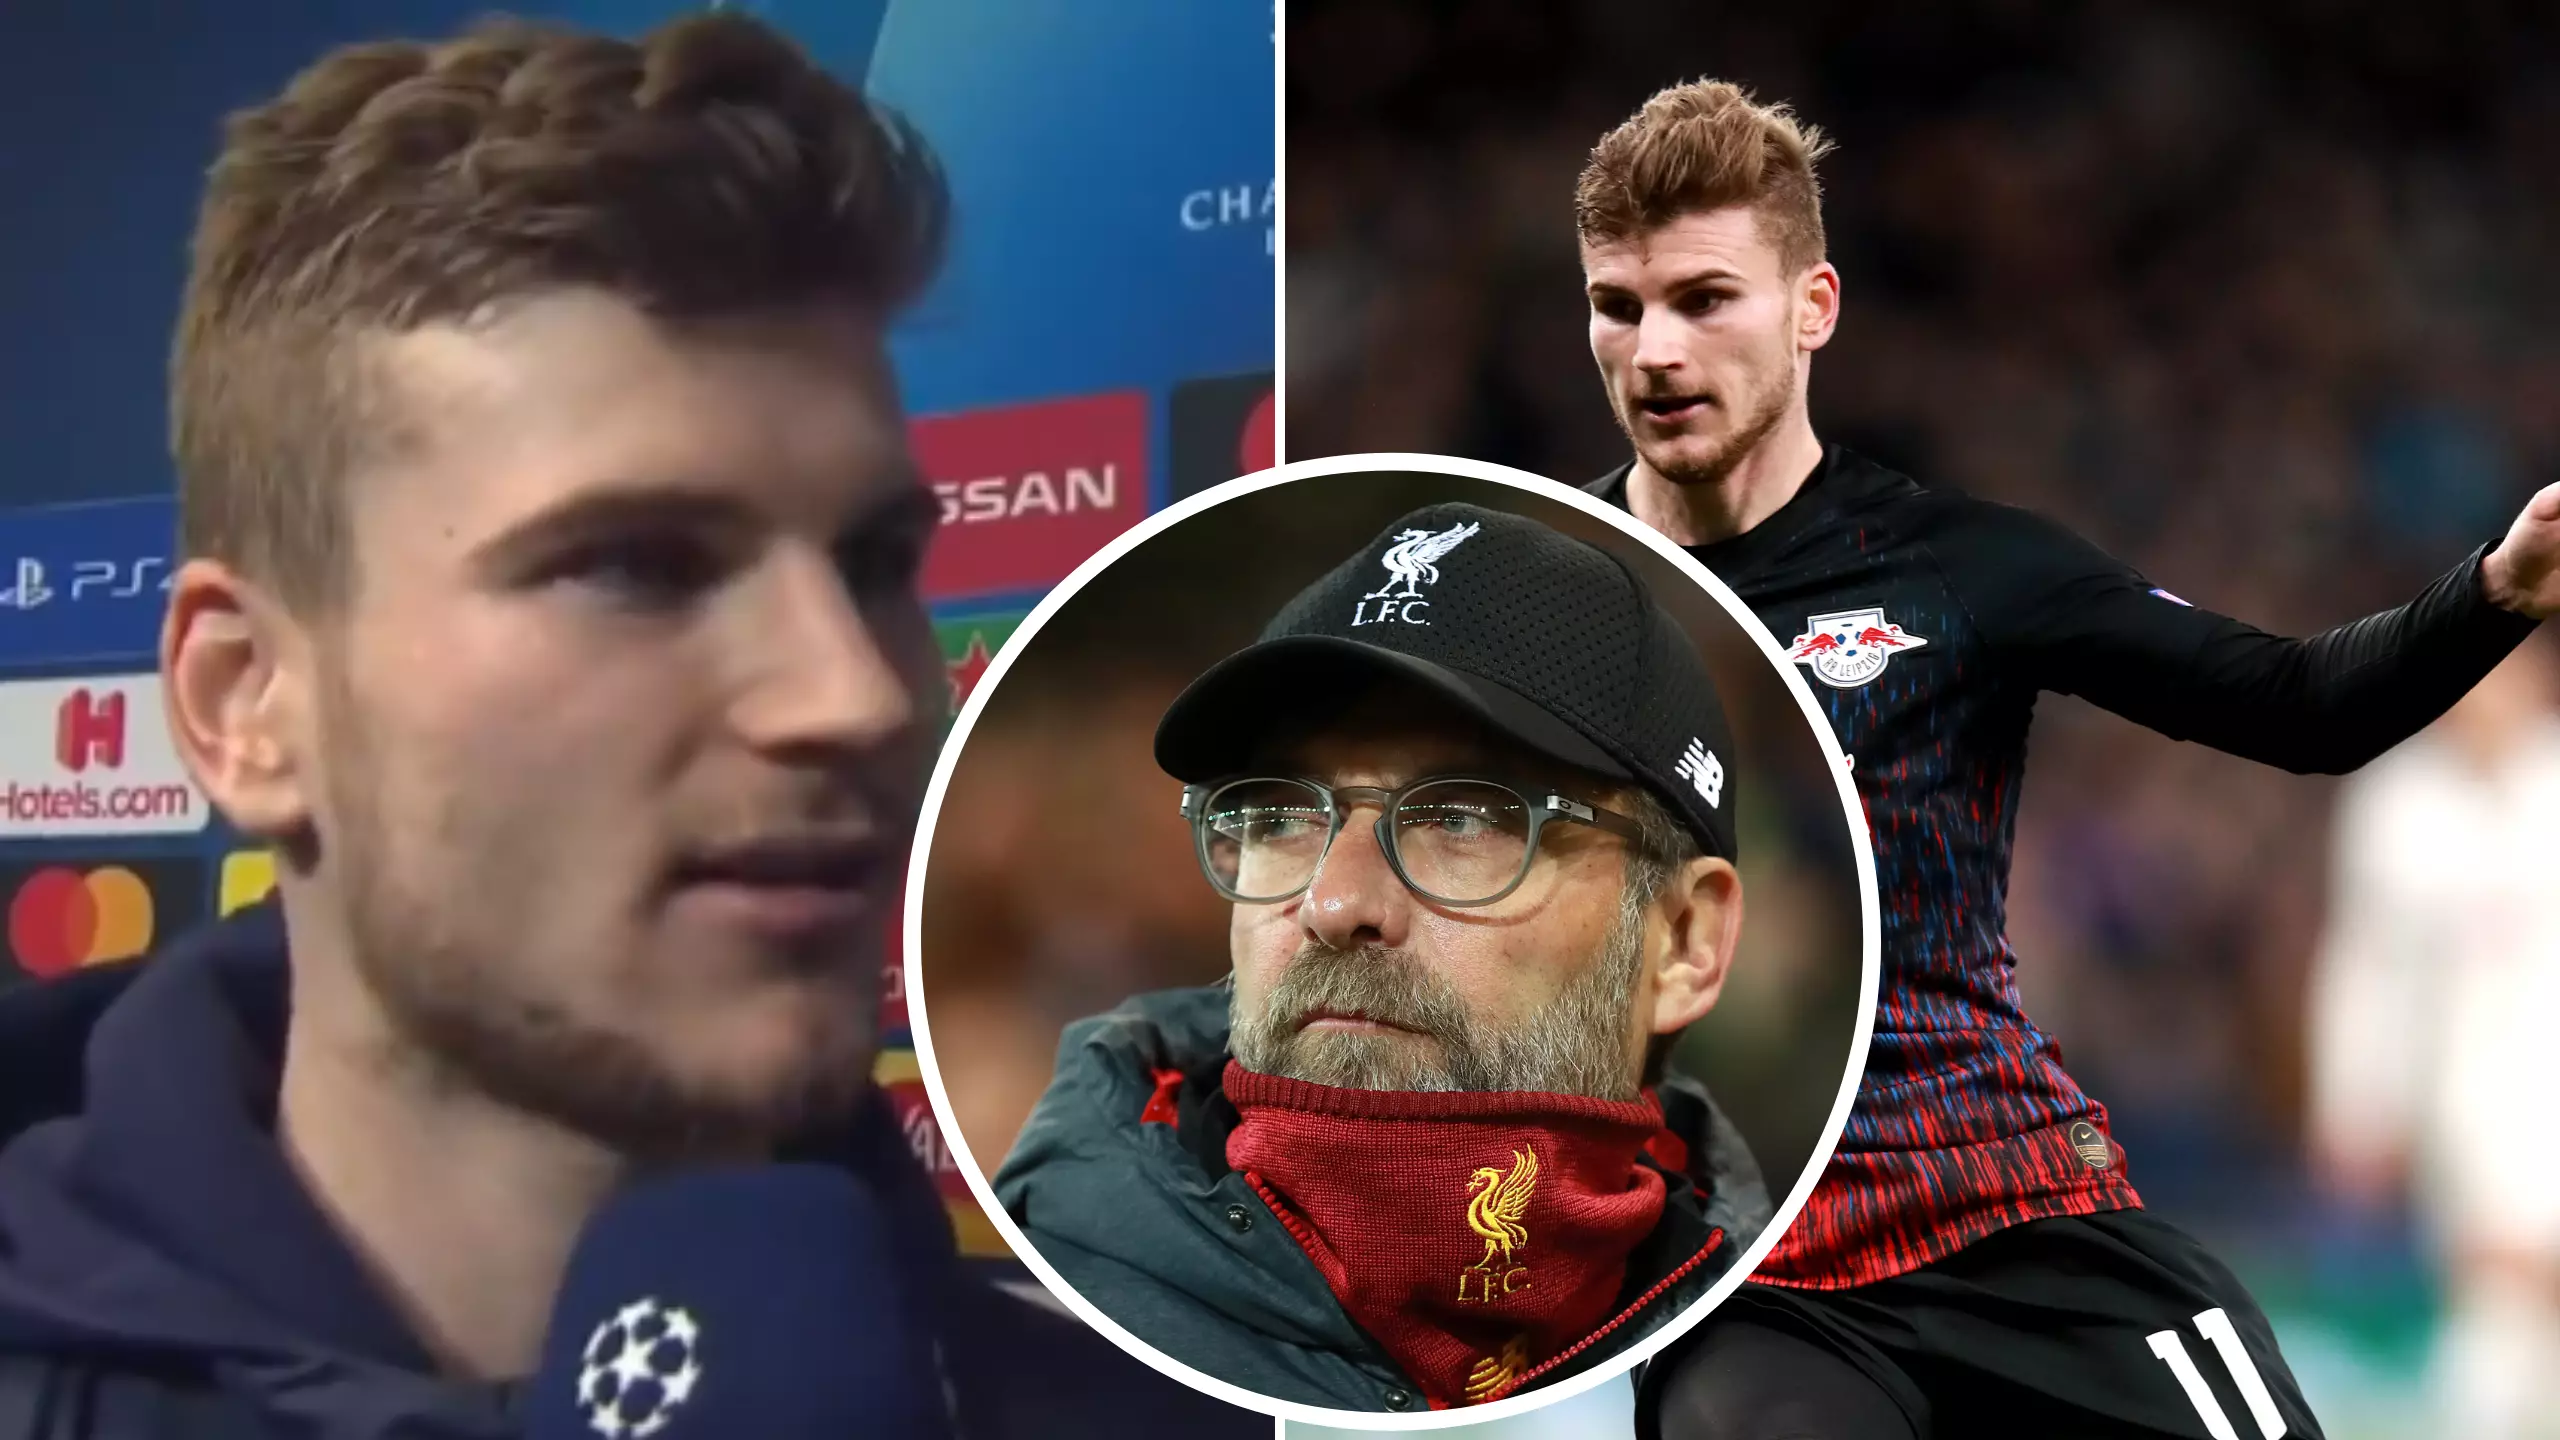 Timo Werner's Post Match Comments Have Made Liverpool Fans Very Excited